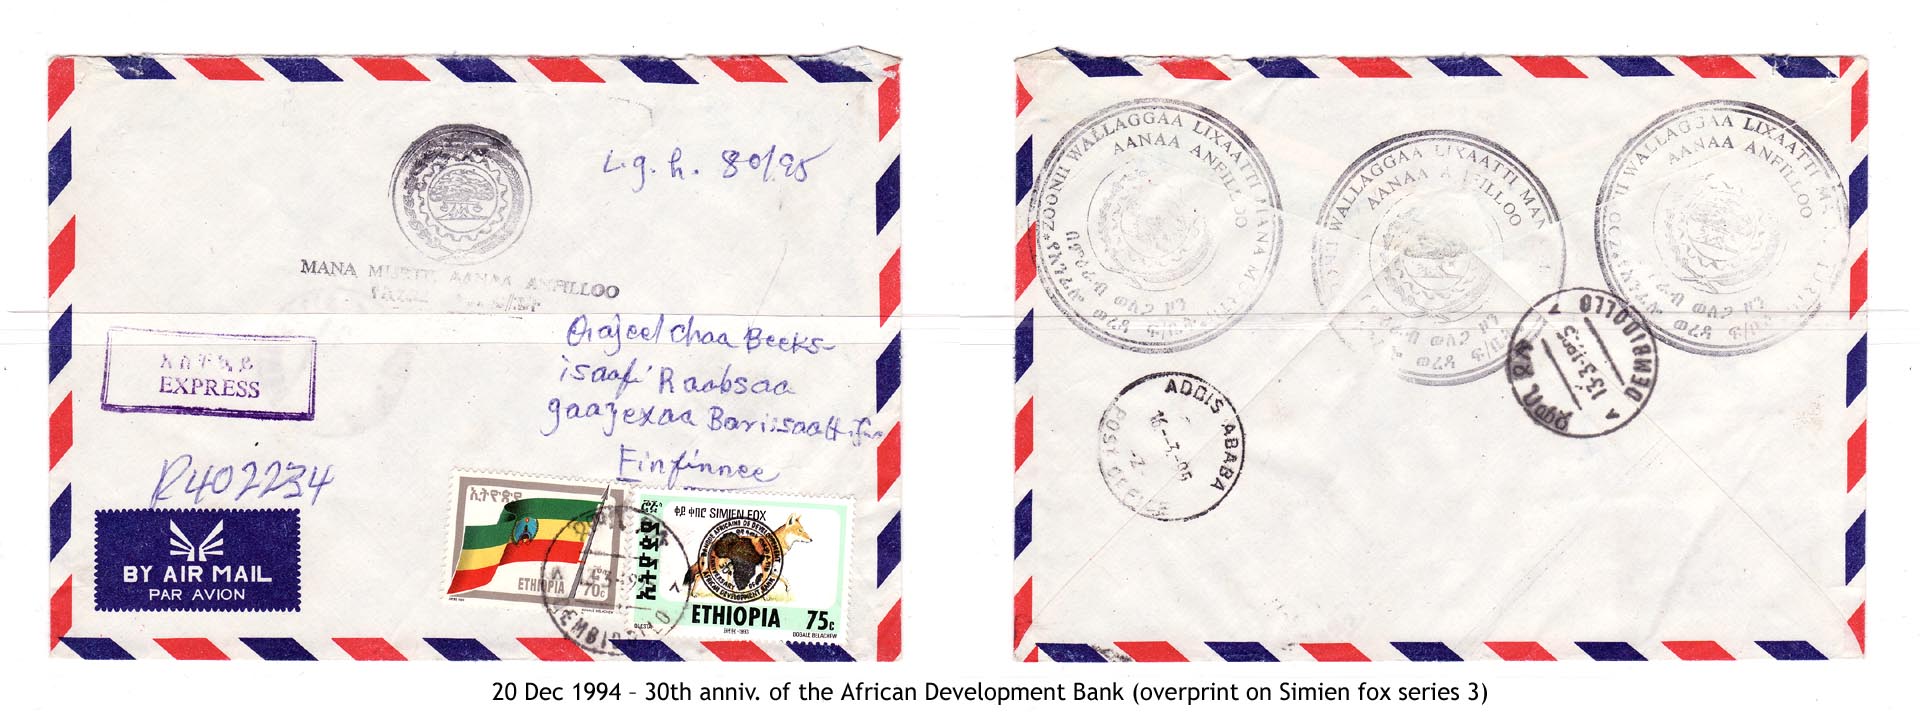 19941220 – 30th anniv. of the African Development Bank (overprint on Simien fox series 3)